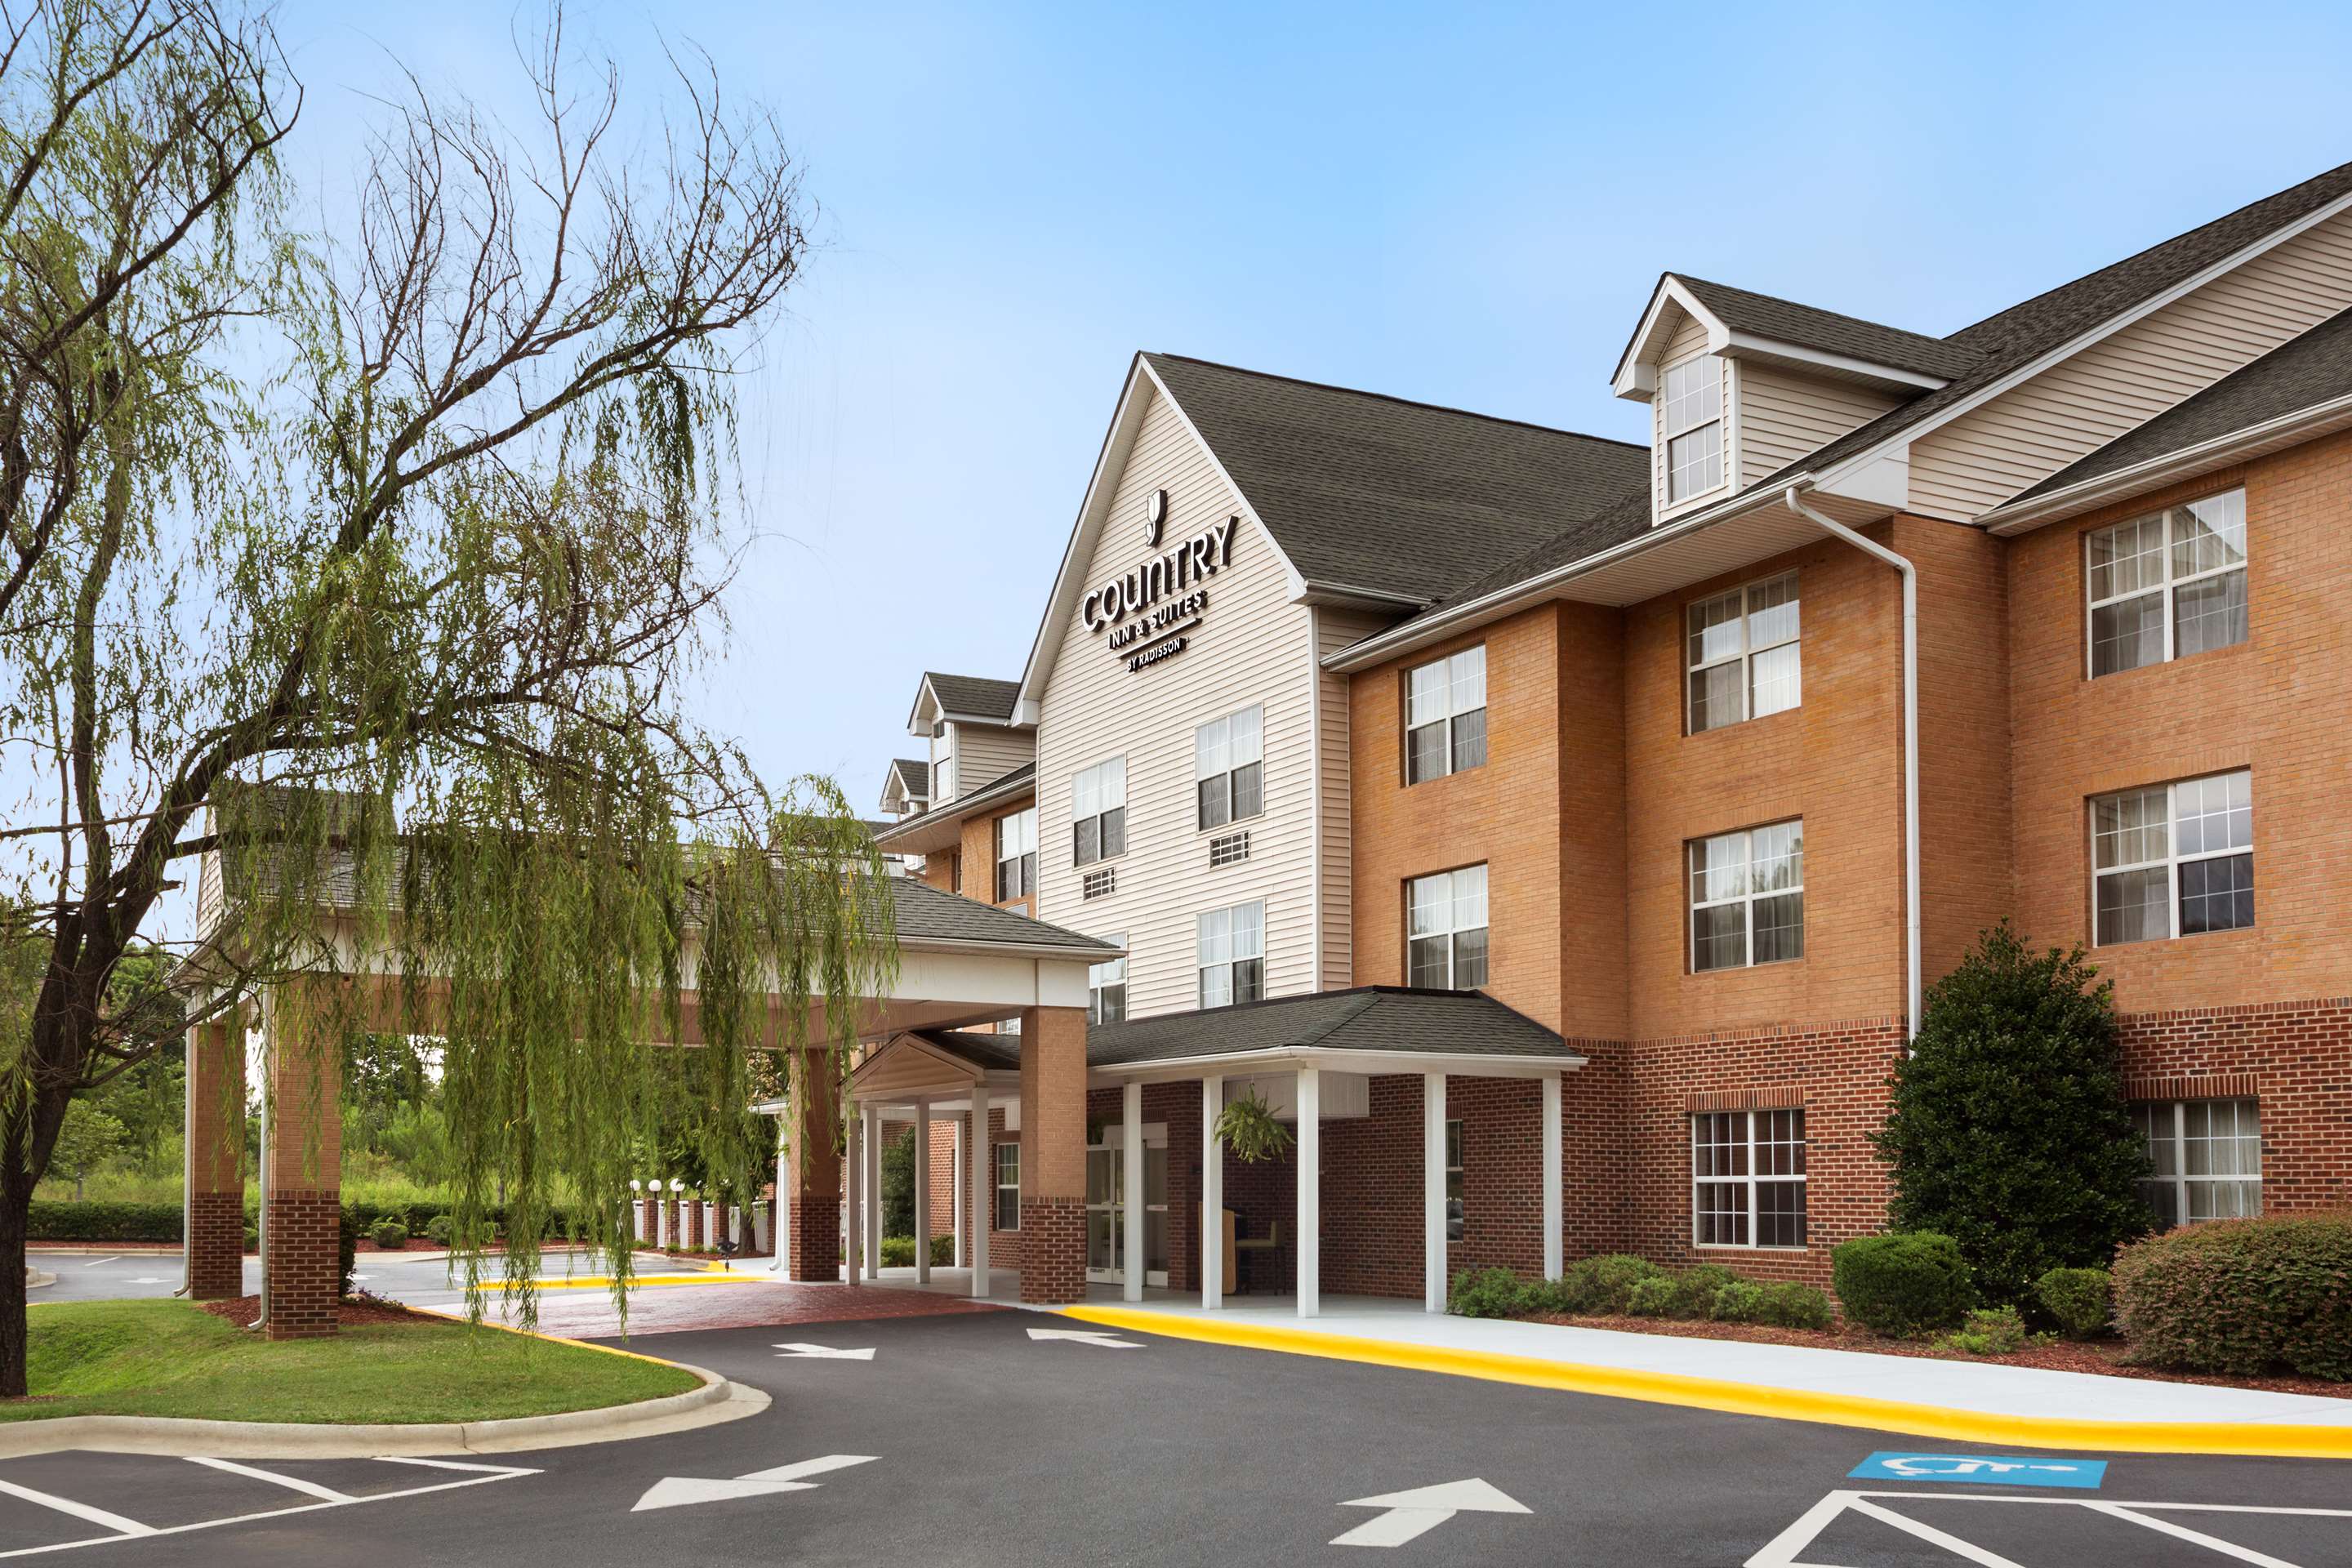 Book a Hotel in Charlotte, NC | Country Inn Charlotte University Place, NC